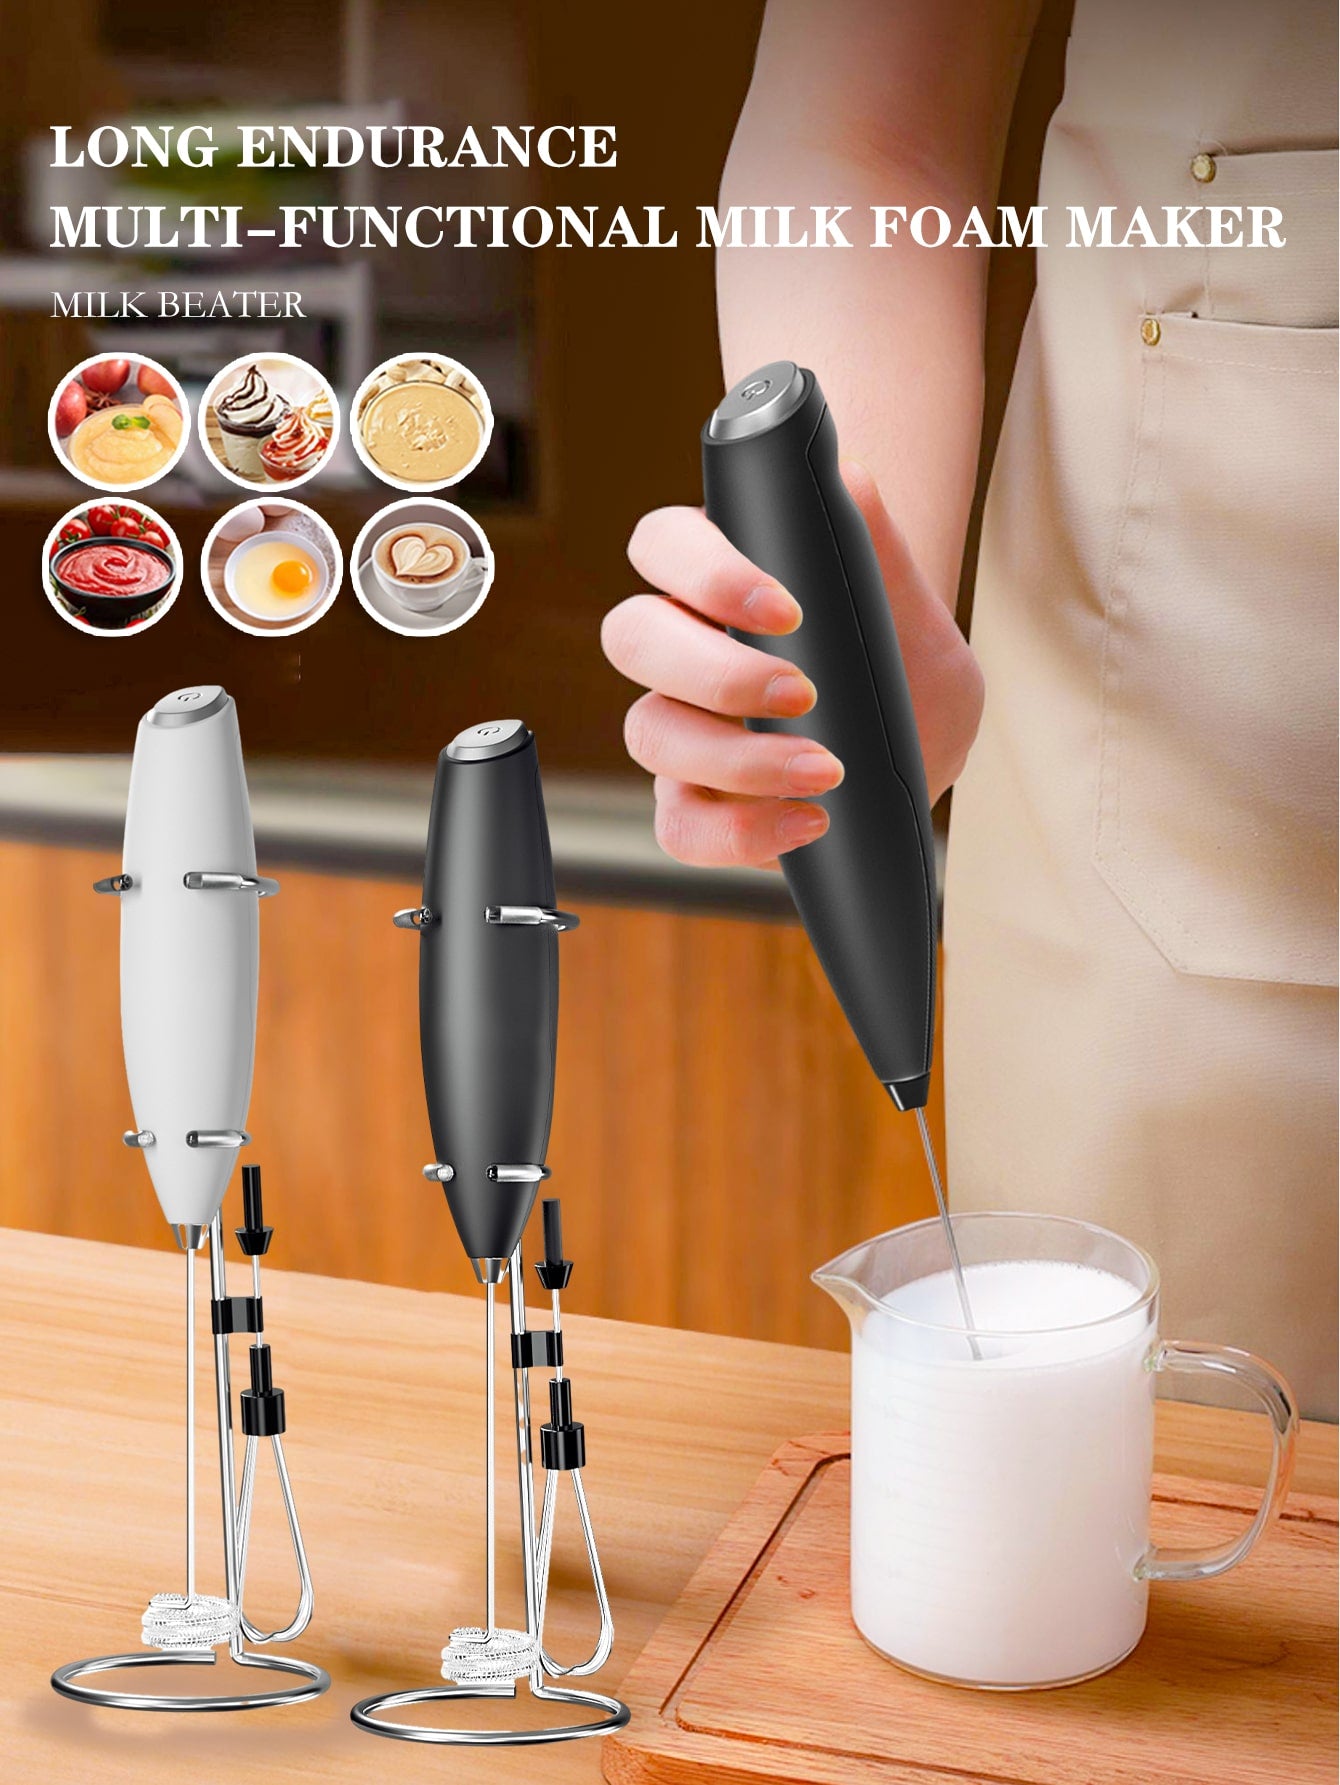 100pcs White Electric Egg Beater & Milk Frother, 80g Portable